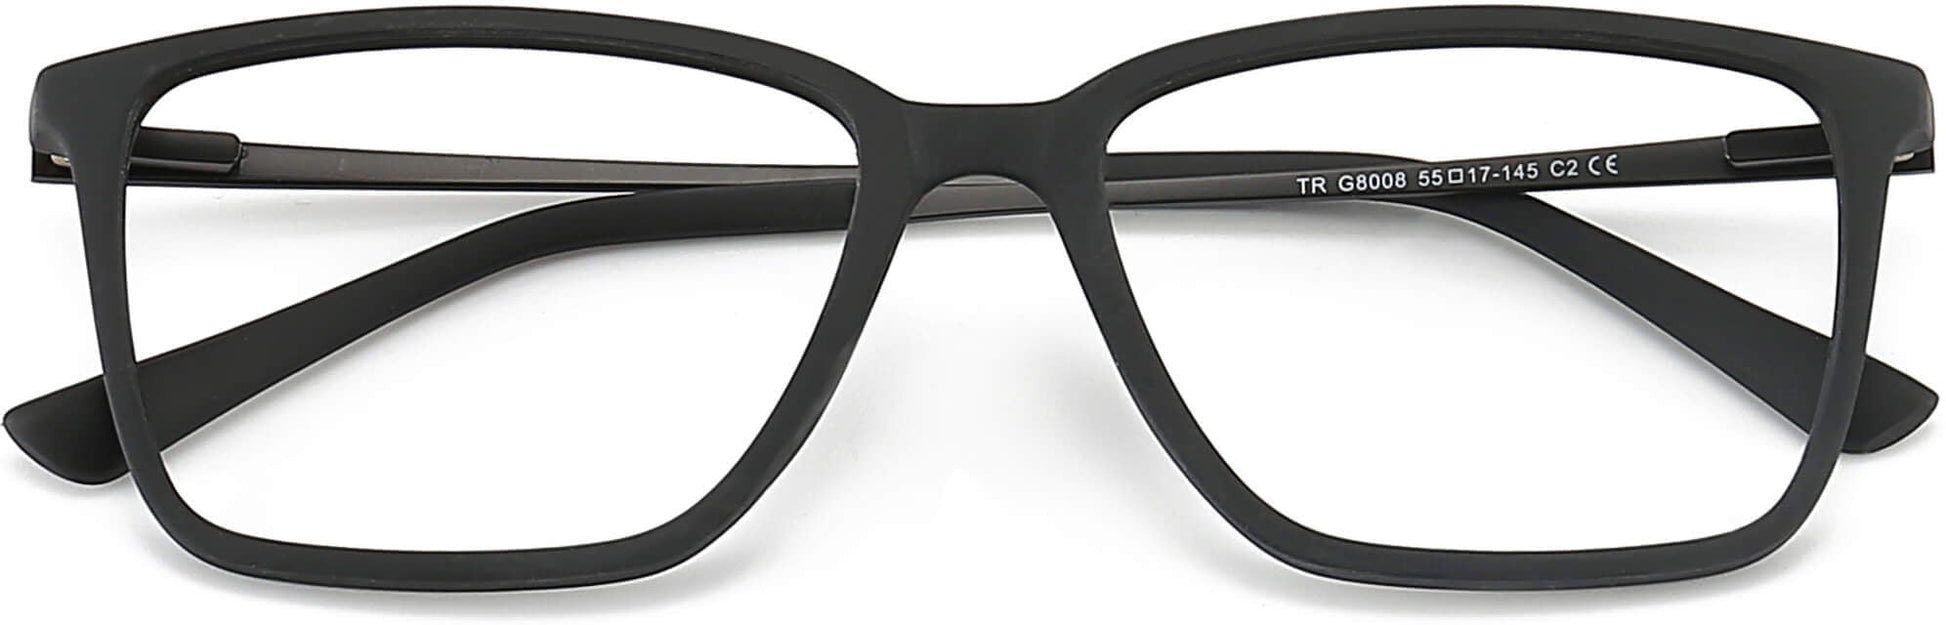 Allen Square Black Eyeglasses from ANRRI, closed view